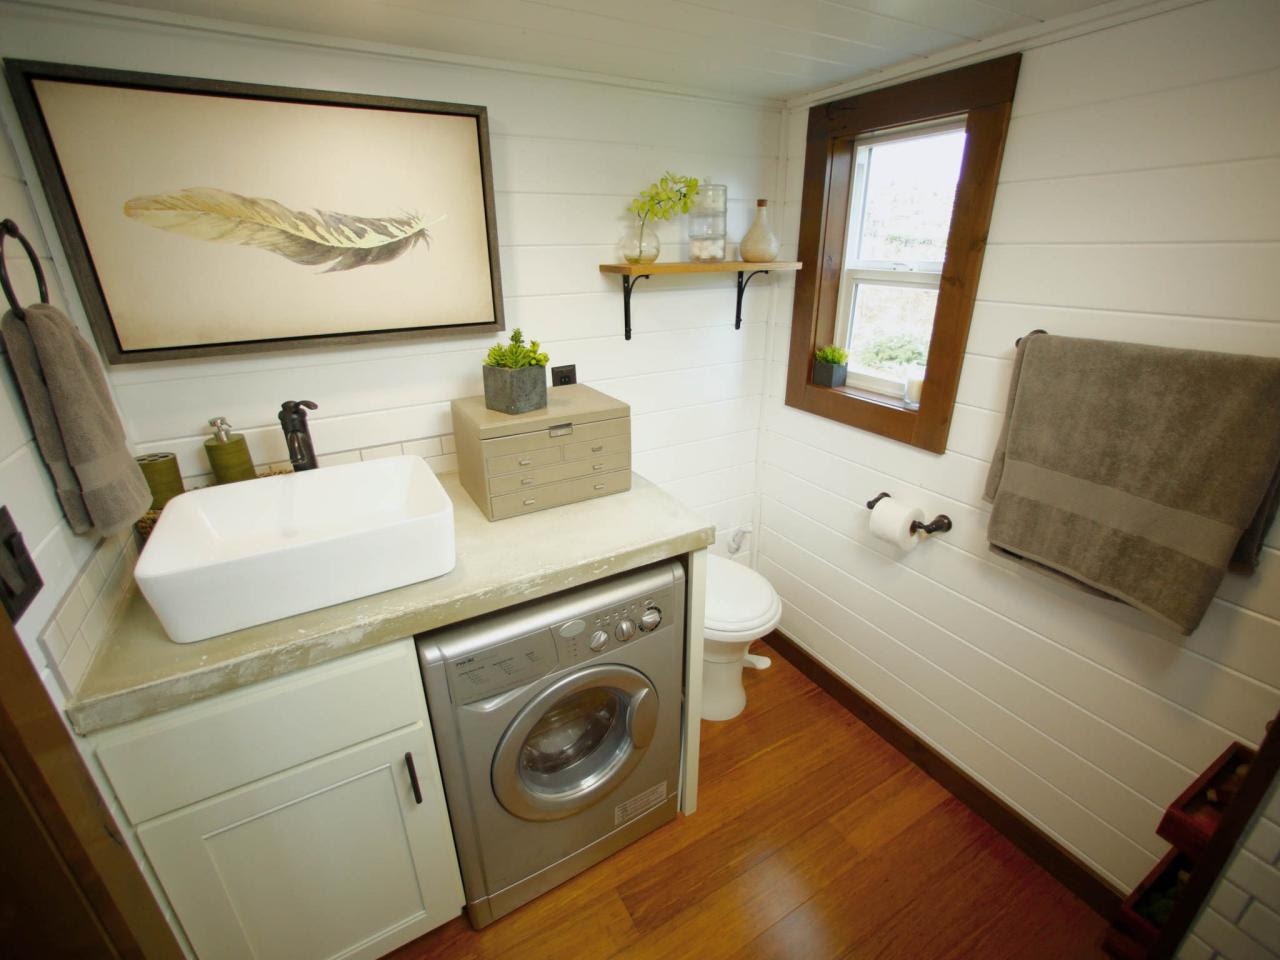 8 Tiny House Bathrooms Packed With Style | HGTV's ...